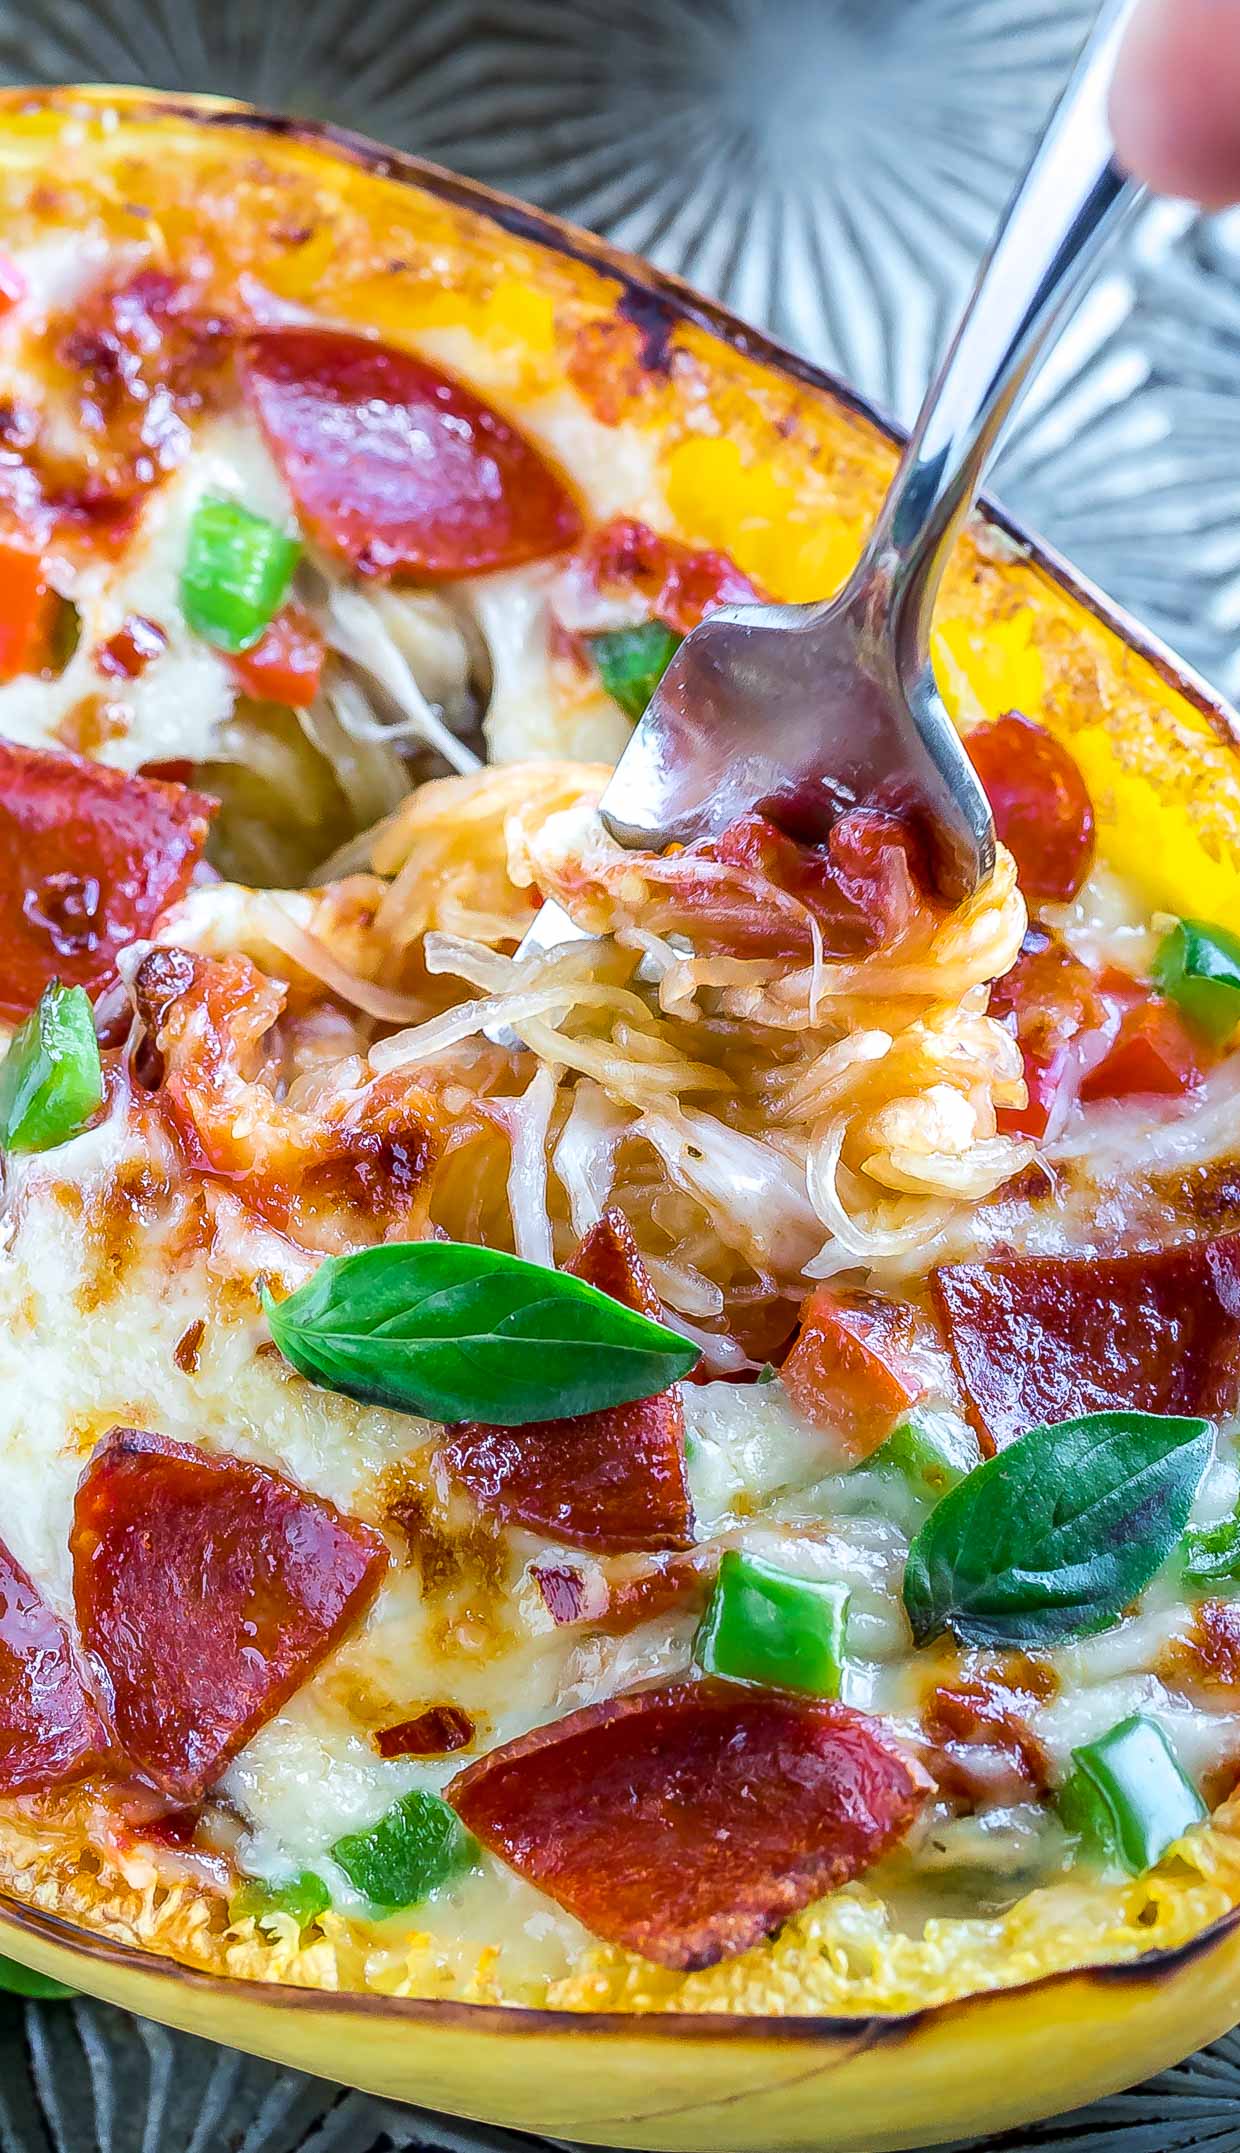 Whip up these Veggie Lover's Spaghetti Squash Pizza Boats for a low-carb + gluten-free pizza night of epic proportions!